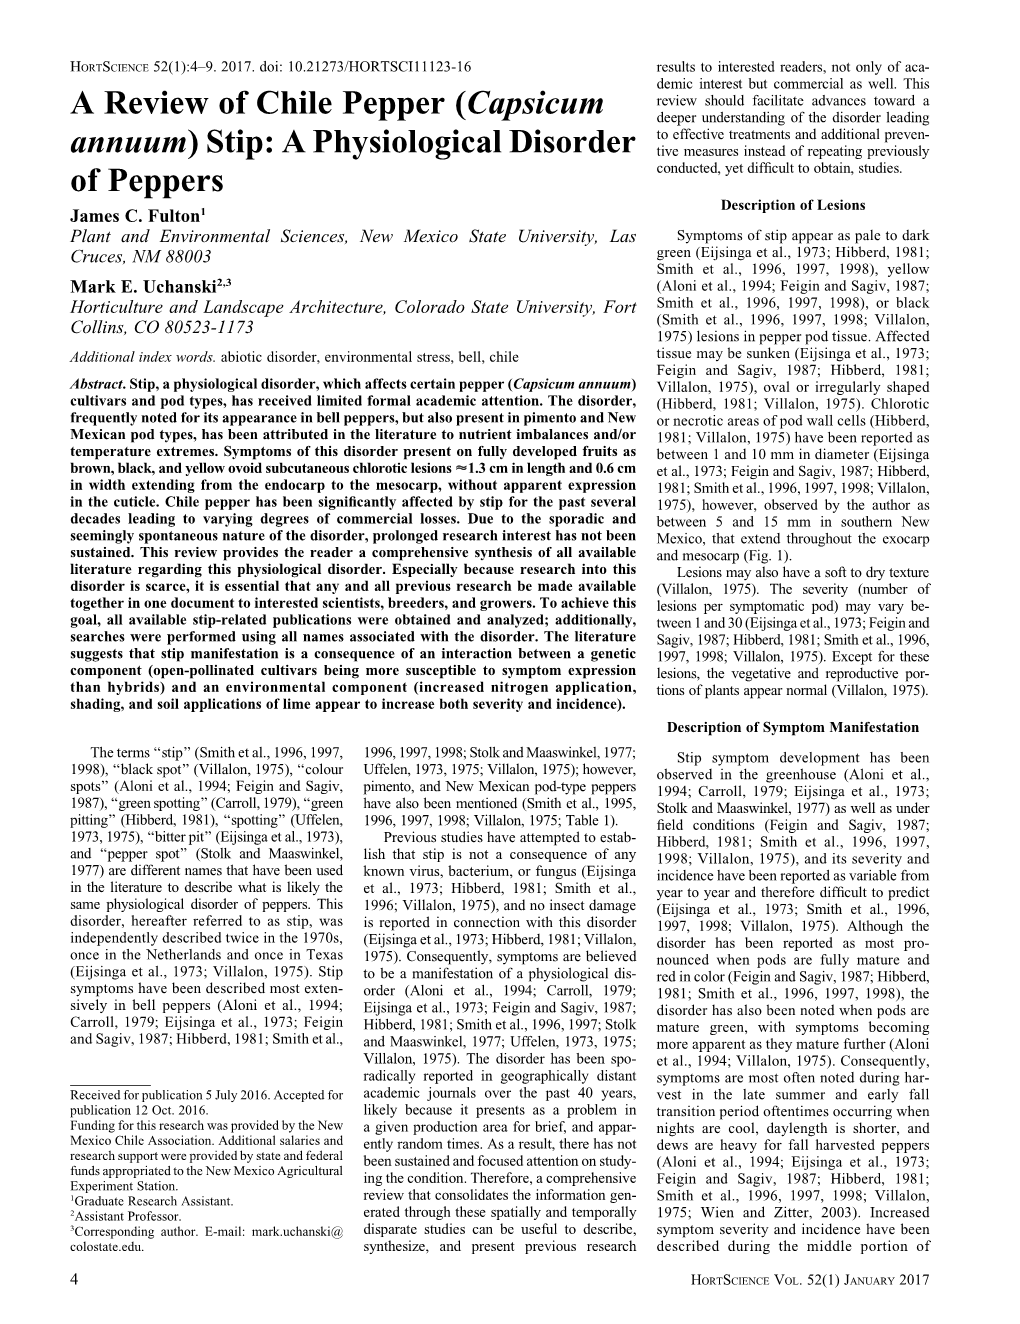 A Physiological Disorder of Peppers